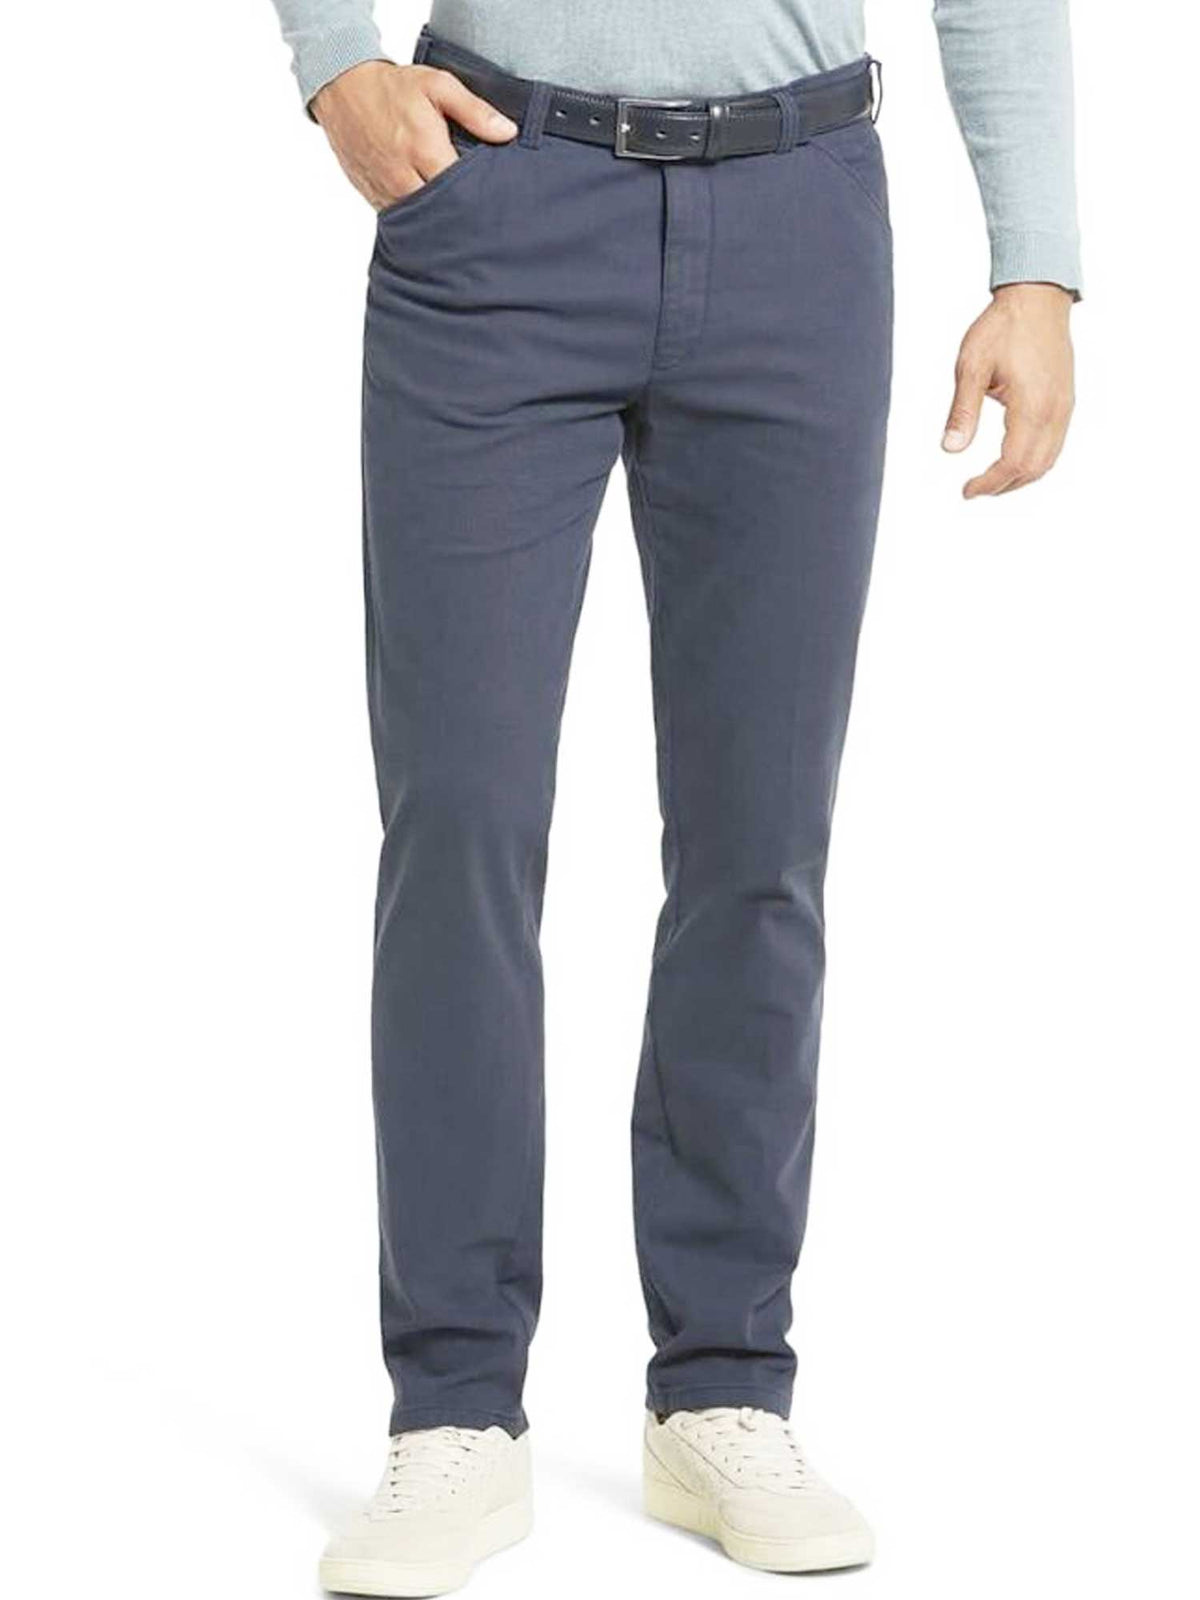 Meyer Chicago-5566-18  https://harrysformenswear.com.au/products/meyer-chicago-5566-18  Meyer Chicago Casual Trousers are the perfect fit Invisible comfort created by high-performance super-stretch fabrics. 97% Cotton 3% Elastane Made in Romania Two side pockets with rear jetted pockets Fob pocket with contrast trim Internal security pocket with zip Full-extension band with metal Clip + 2 buttons for a fi…